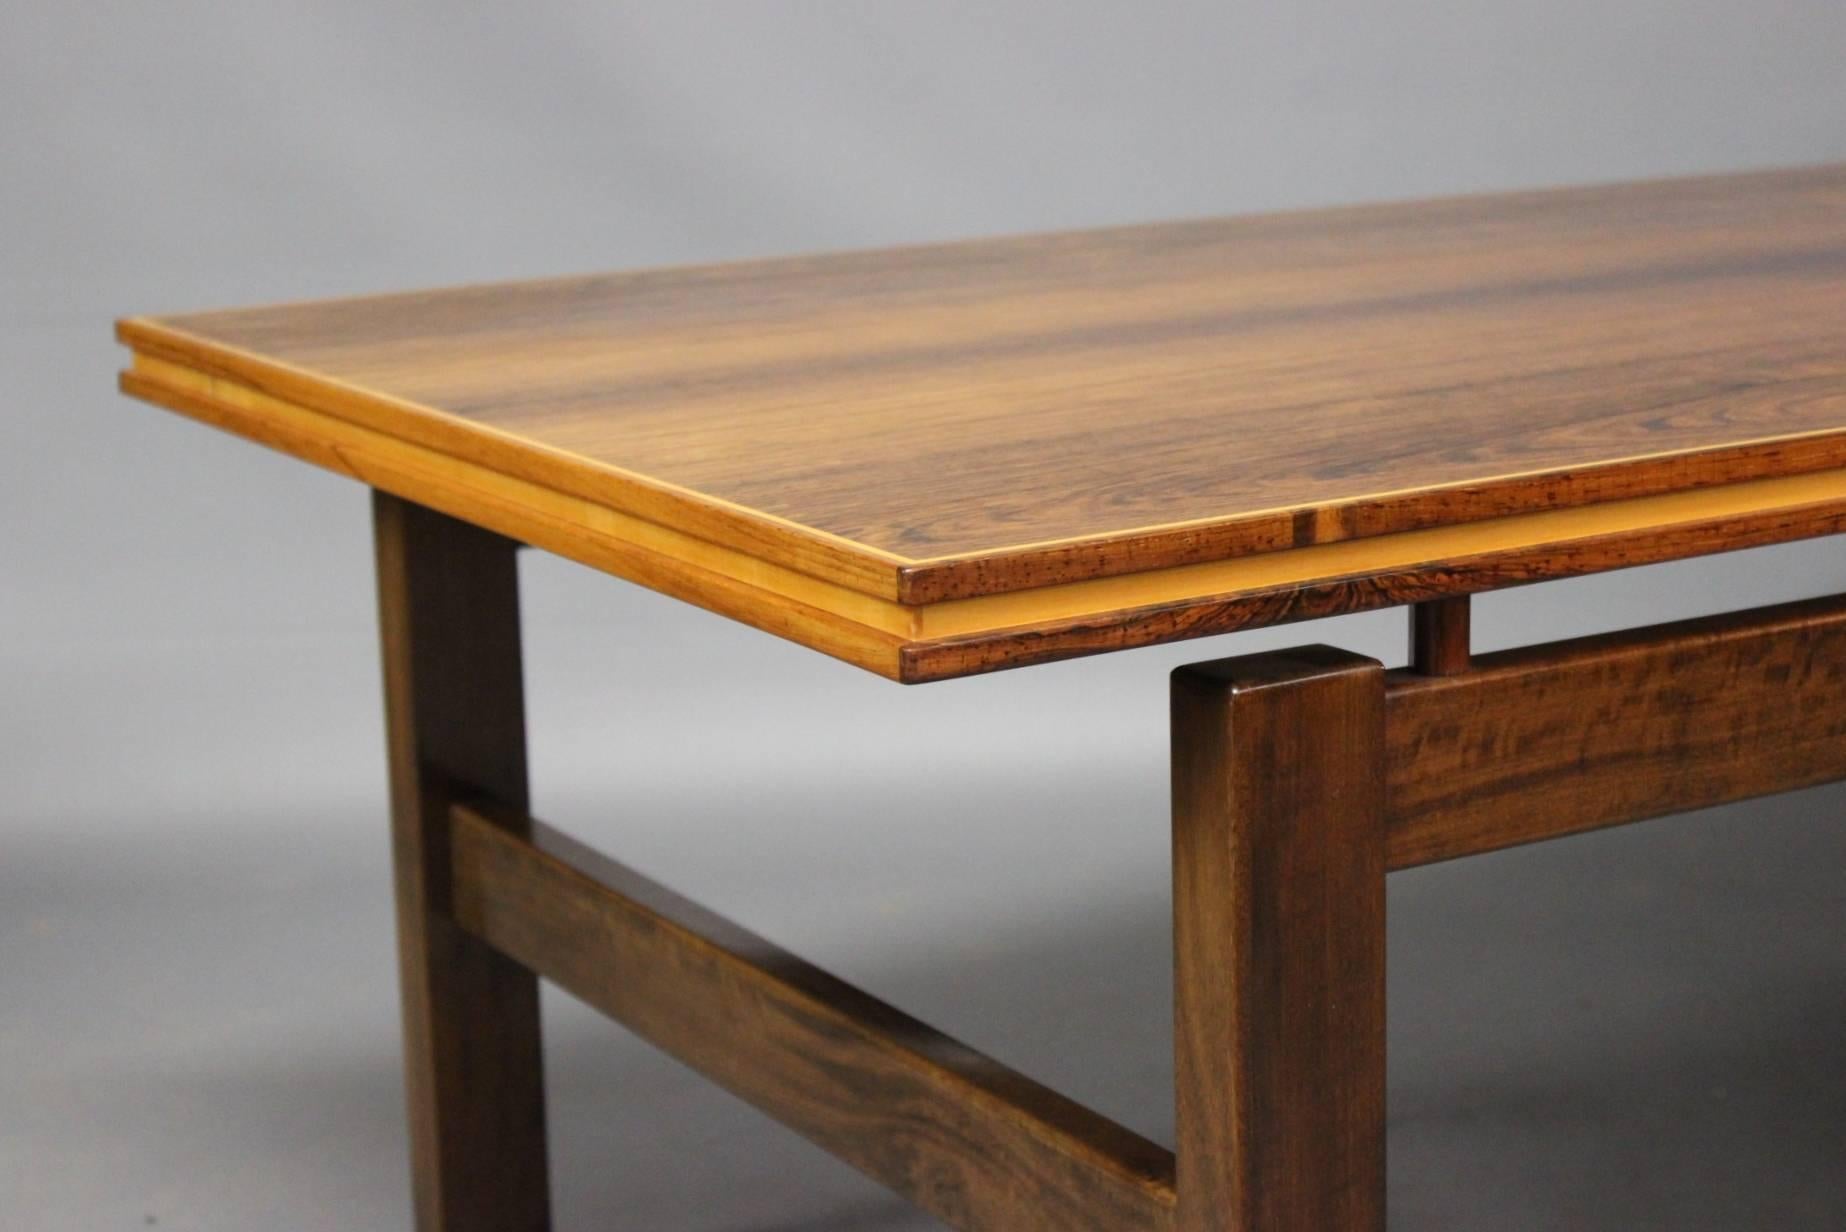 Mid-20th Century Rosewood Coffee Table of Danish Design from the 1960s For Sale